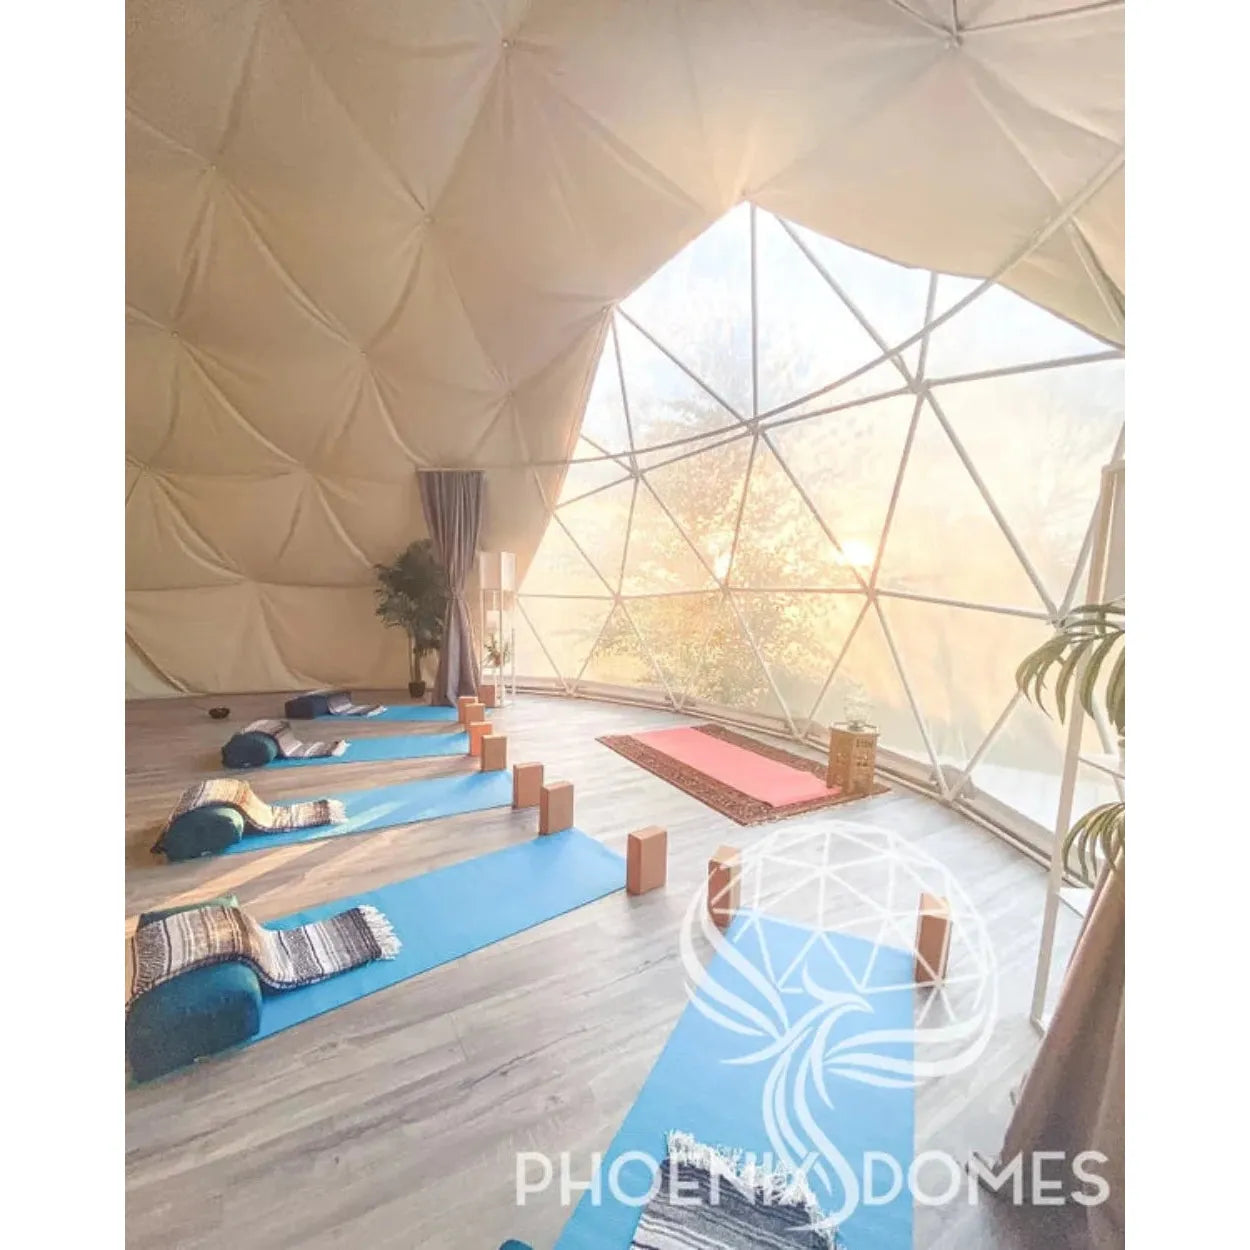 4-season-deluxe-glamping-yoga-package-dome-3310m-143